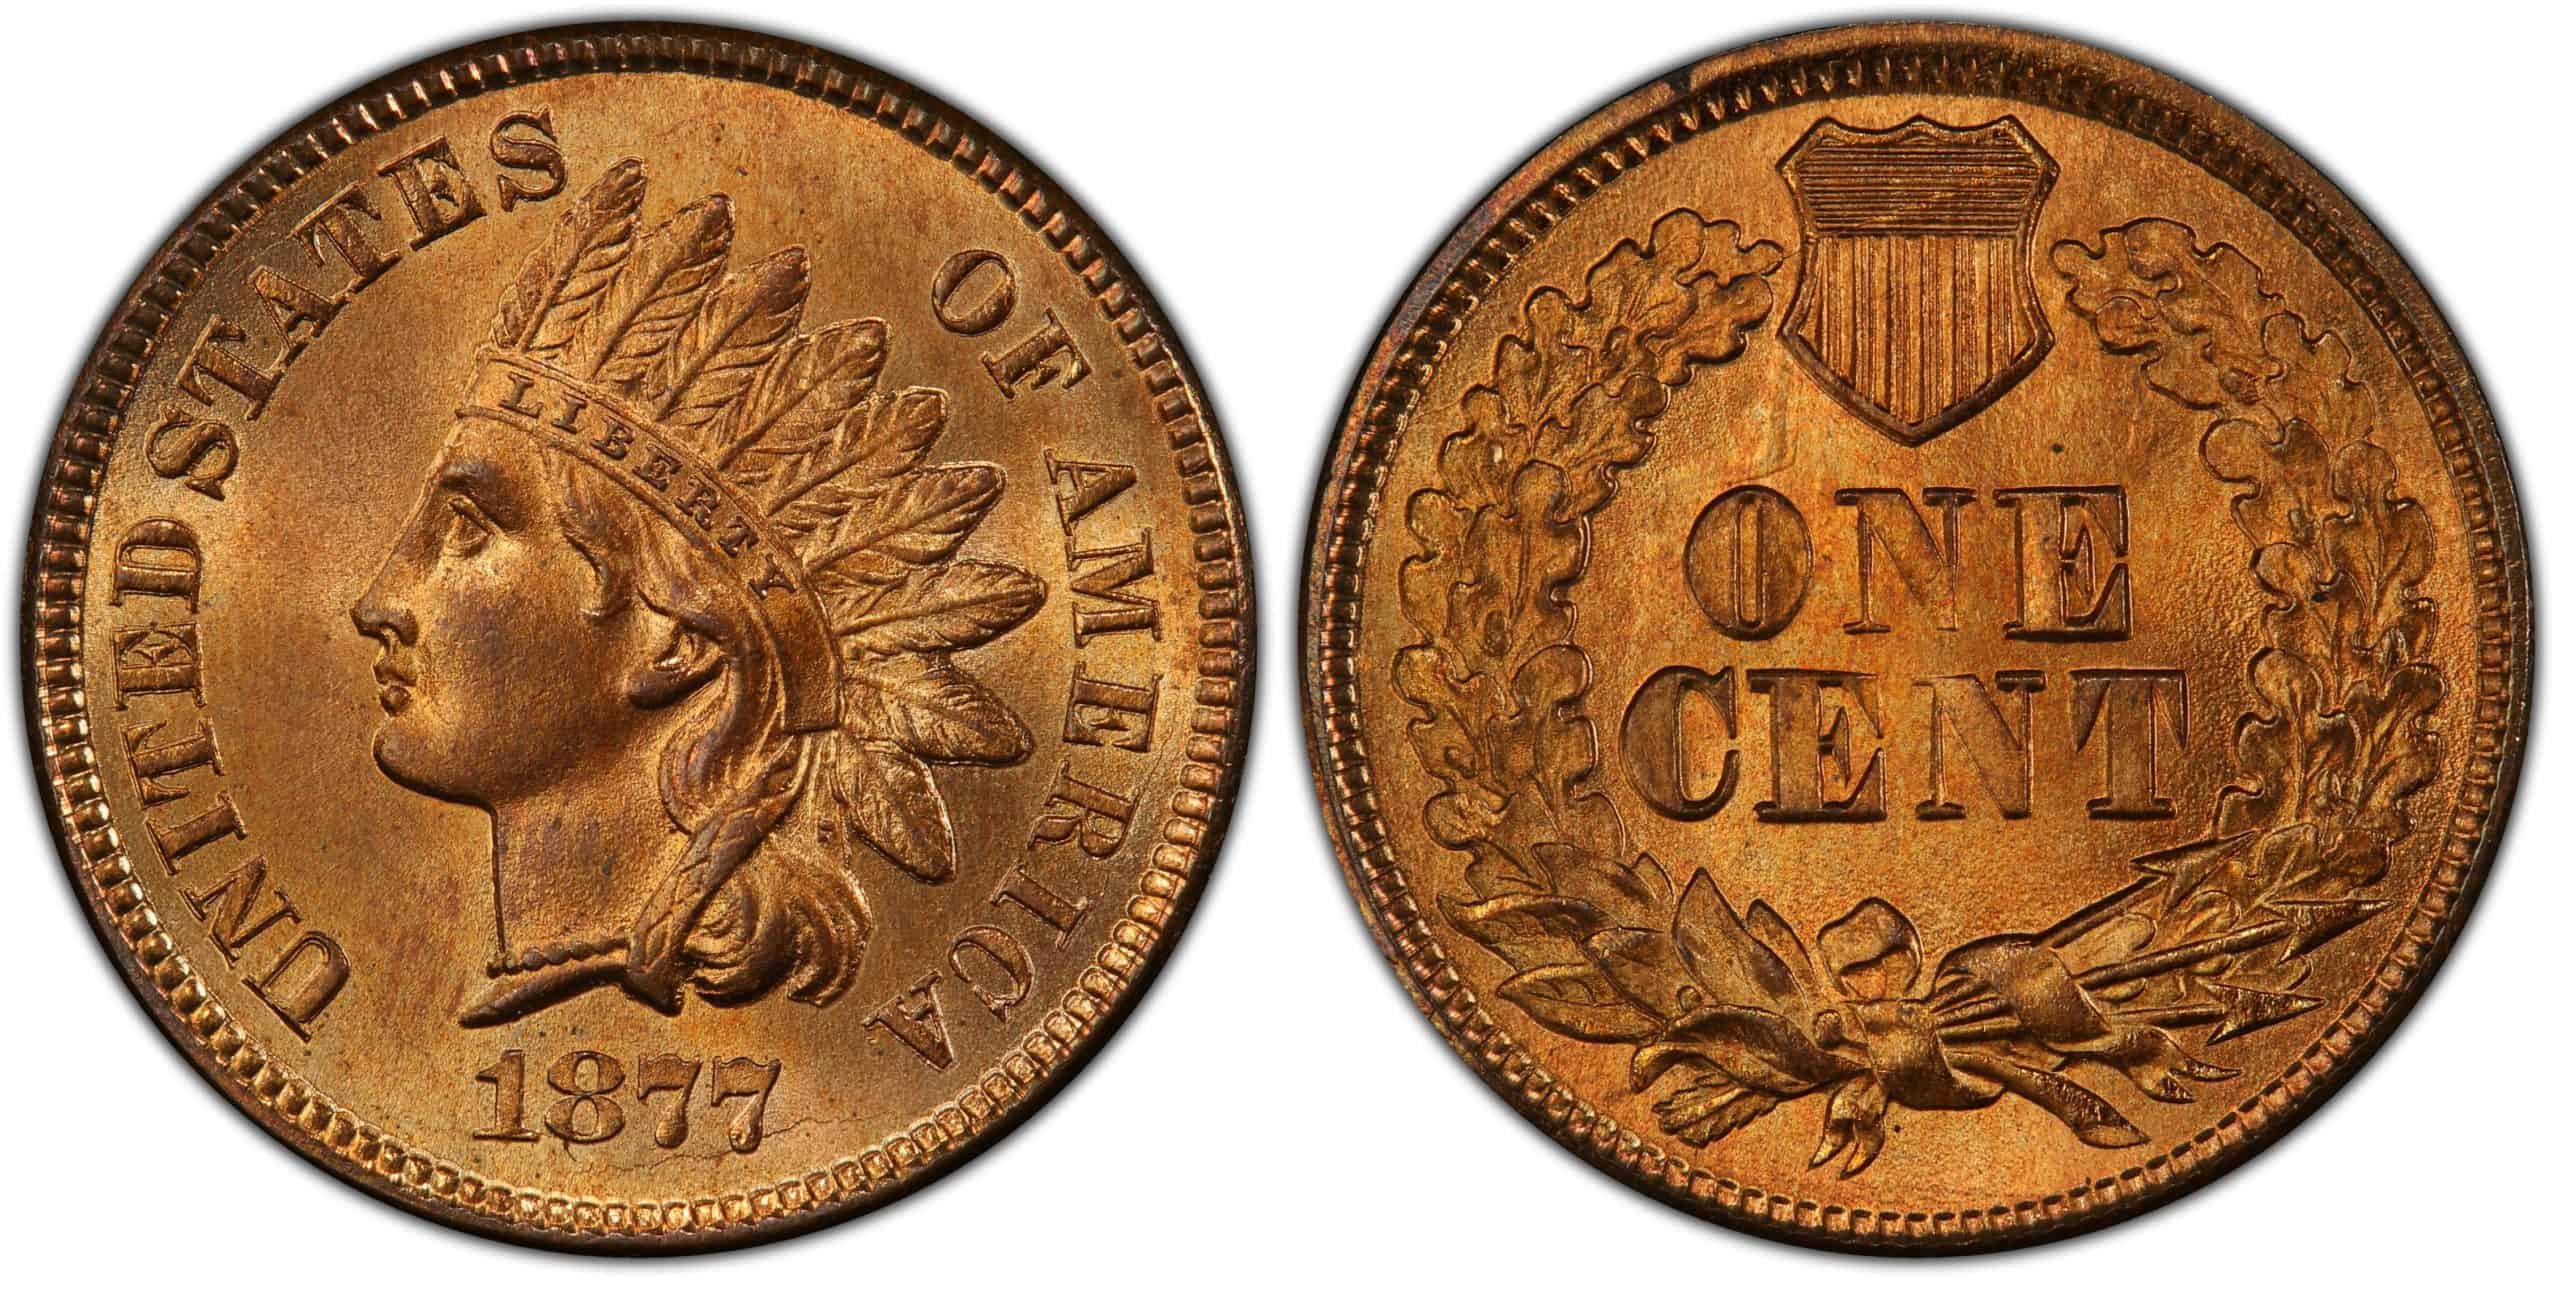 1877 Indian head penny